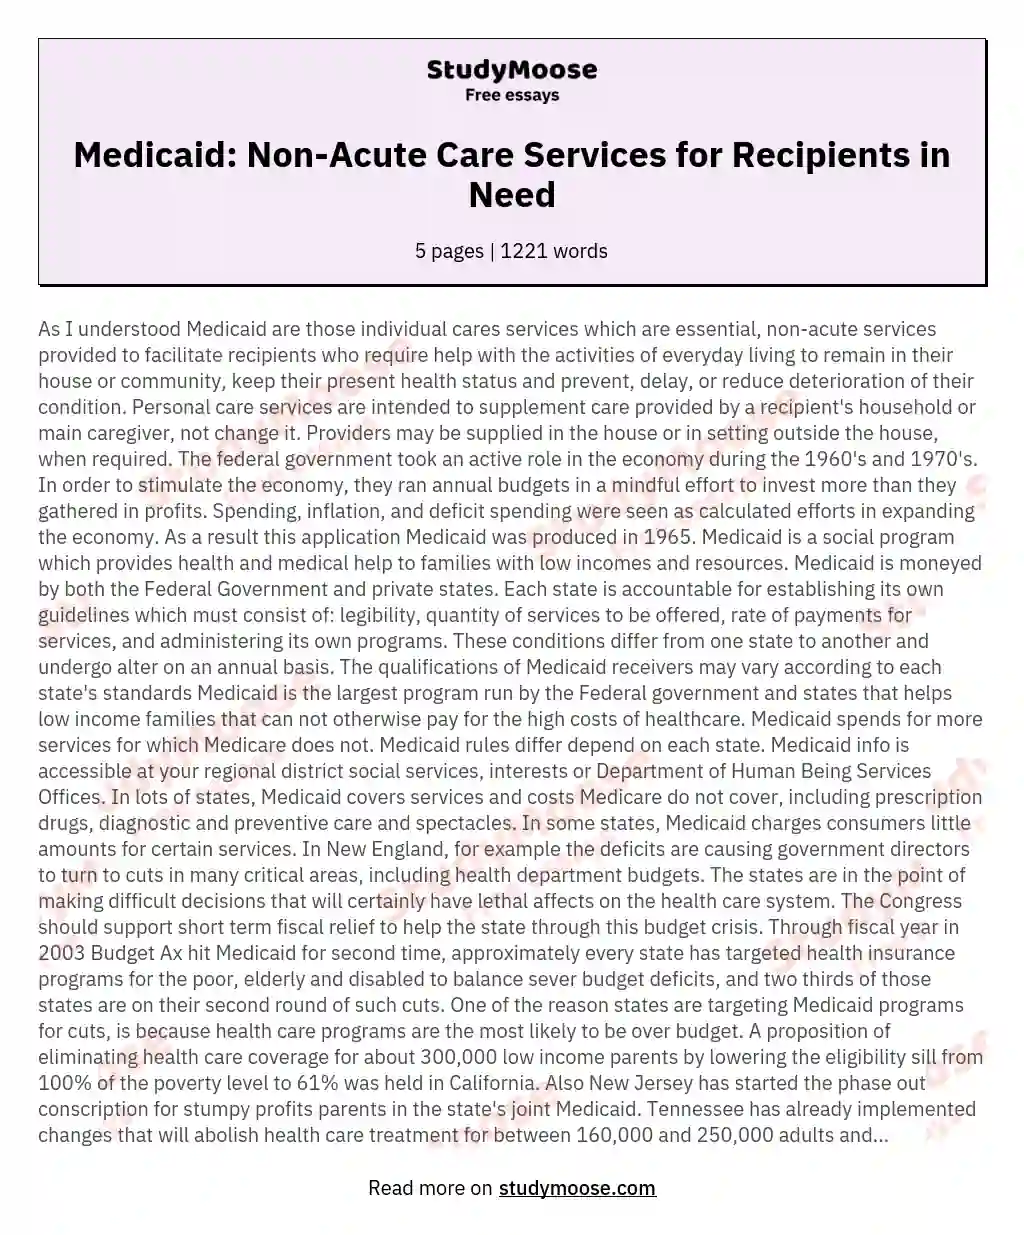 Medicaid: Non-Acute Care Services for Recipients in Need